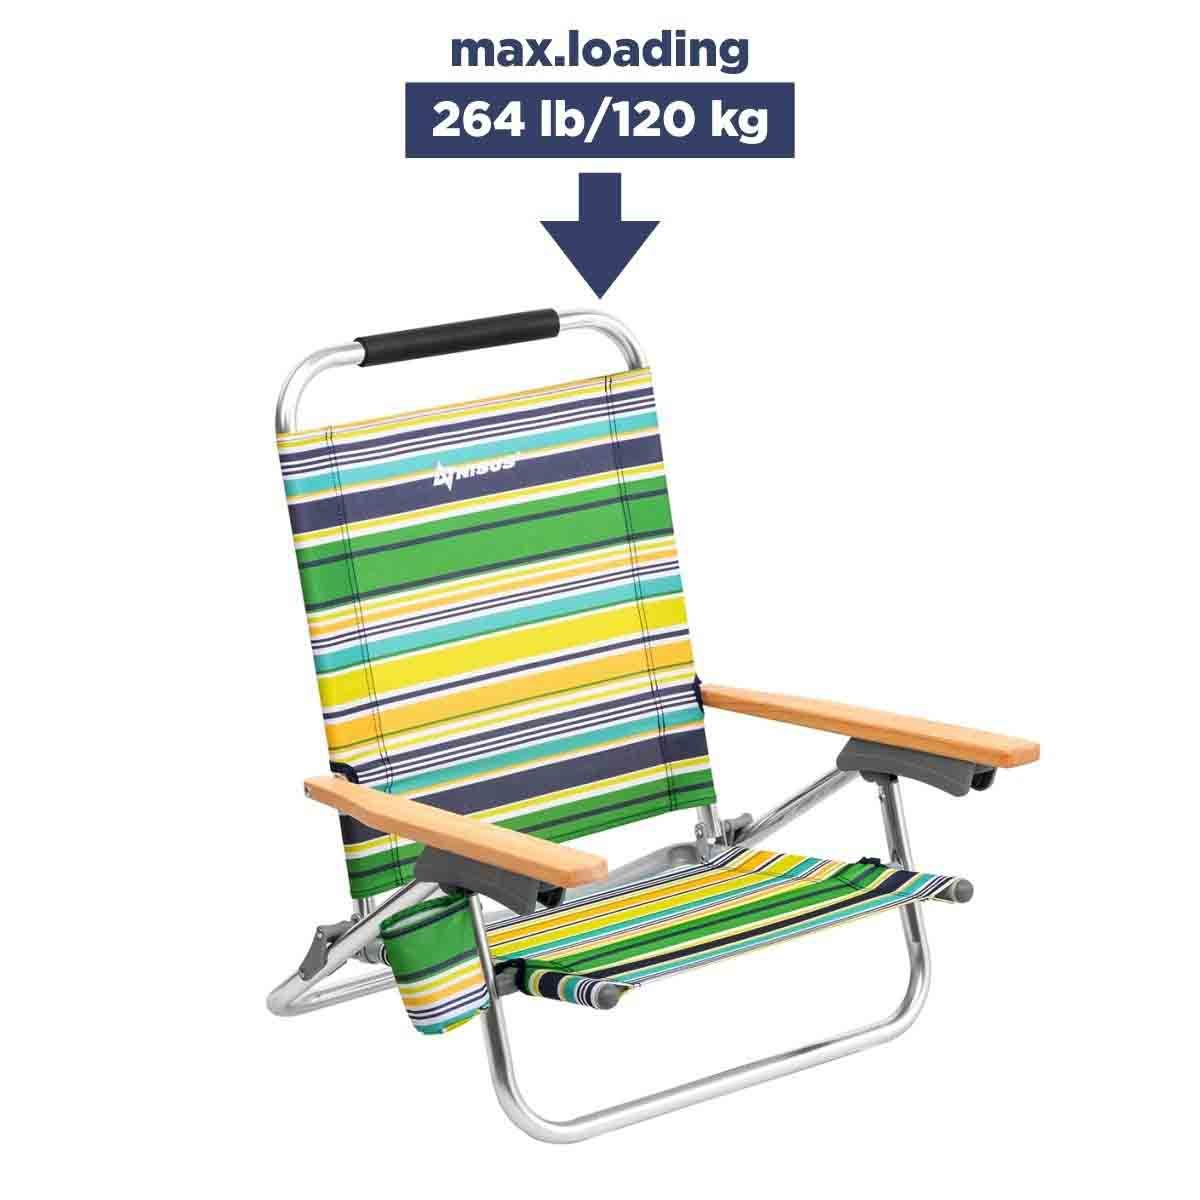 Lightest Backpack Beach Chair with Cup Holder max loading is 264 lbs